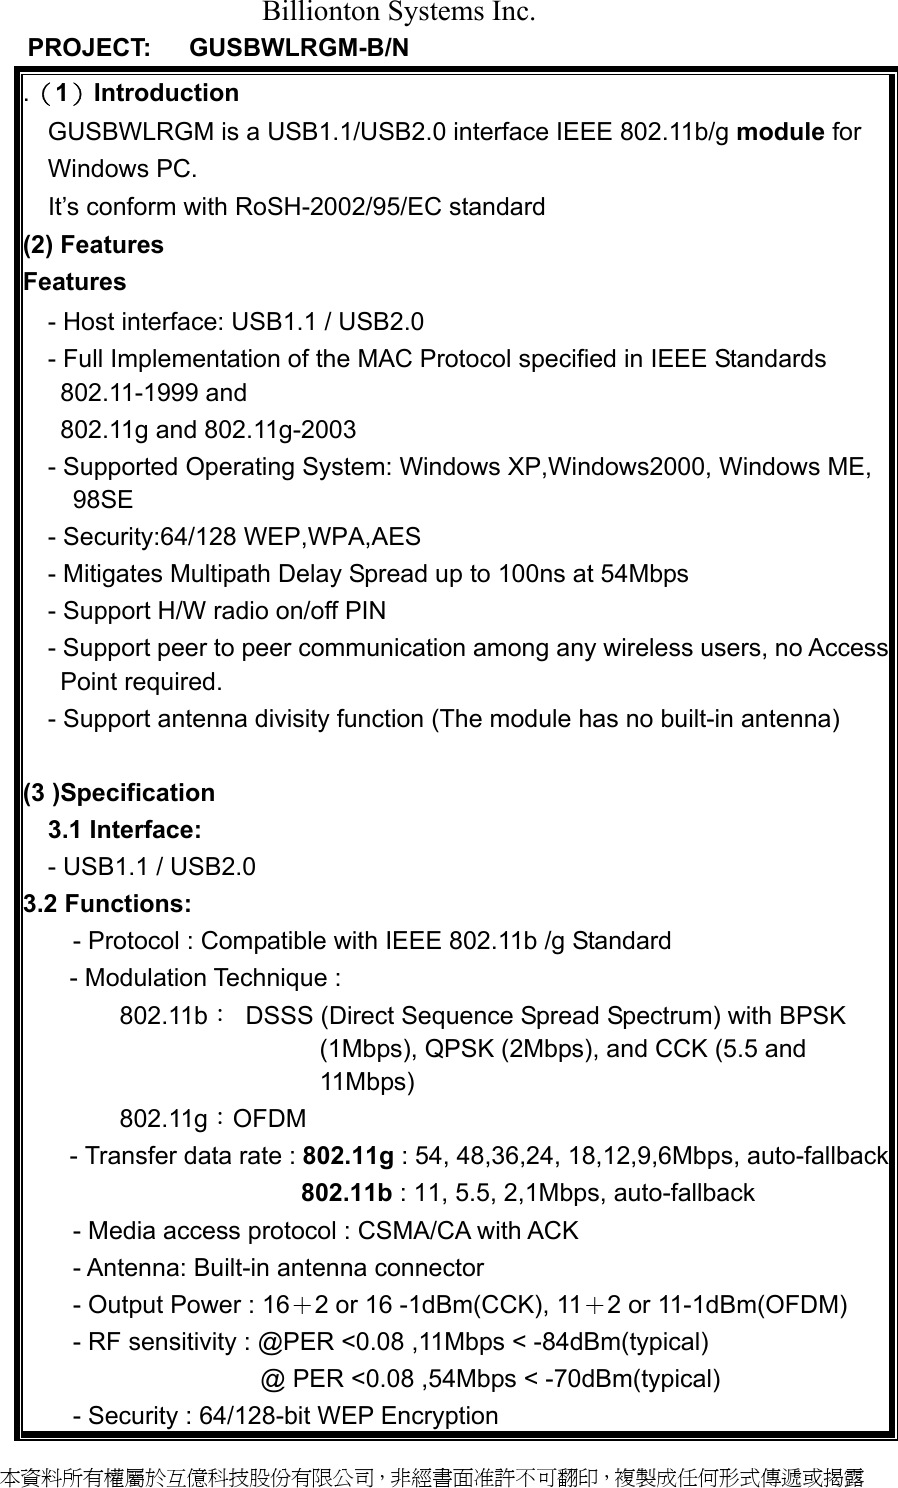 Billionton Systems Inc.    PROJECT:   GUSBWLRGM-B/N            .（1）Introduction  GUSBWLRGM is a USB1.1/USB2.0 interface IEEE 802.11b/g module for Windows PC.     It’s conform with RoSH-2002/95/EC standard (2) Features Features - Host interface: USB1.1 / USB2.0 - Full Implementation of the MAC Protocol specified in IEEE Standards 802.11-1999 and     802.11g and 802.11g-2003 - Supported Operating System: Windows XP,Windows2000, Windows ME, 98SE - Security:64/128 WEP,WPA,AES - Mitigates Multipath Delay Spread up to 100ns at 54Mbps - Support H/W radio on/off PIN - Support peer to peer communication among any wireless users, no Access Point required. - Support antenna divisity function (The module has no built-in antenna)  (3 )Specification 3.1 Interface:   - USB1.1 / USB2.0 3.2 Functions:  - Protocol : Compatible with IEEE 802.11b /g Standard - Modulation Technique : 802.11b：  DSSS (Direct Sequence Spread Spectrum) with BPSK (1Mbps), QPSK (2Mbps), and CCK (5.5 and 11Mbps)       802.11g：OFDM   - Transfer data rate : 802.11g : 54, 48,36,24, 18,12,9,6Mbps, auto-fallback                  802.11b : 11, 5.5, 2,1Mbps, auto-fallback   - Media access protocol : CSMA/CA with ACK - Antenna: Built-in antenna connector - Output Power : 16＋2 or 16 -1dBm(CCK), 11＋2 or 11-1dBm(OFDM) - RF sensitivity : @PER &lt;0.08 ,11Mbps &lt; -84dBm(typical)                  @ PER &lt;0.08 ,54Mbps &lt; -70dBm(typical) - Security : 64/128-bit WEP Encryption 本資料所有權屬於互億科技股份有限公司，非經書面准許不可翻印，複製成任何形式傳遞或揭露 